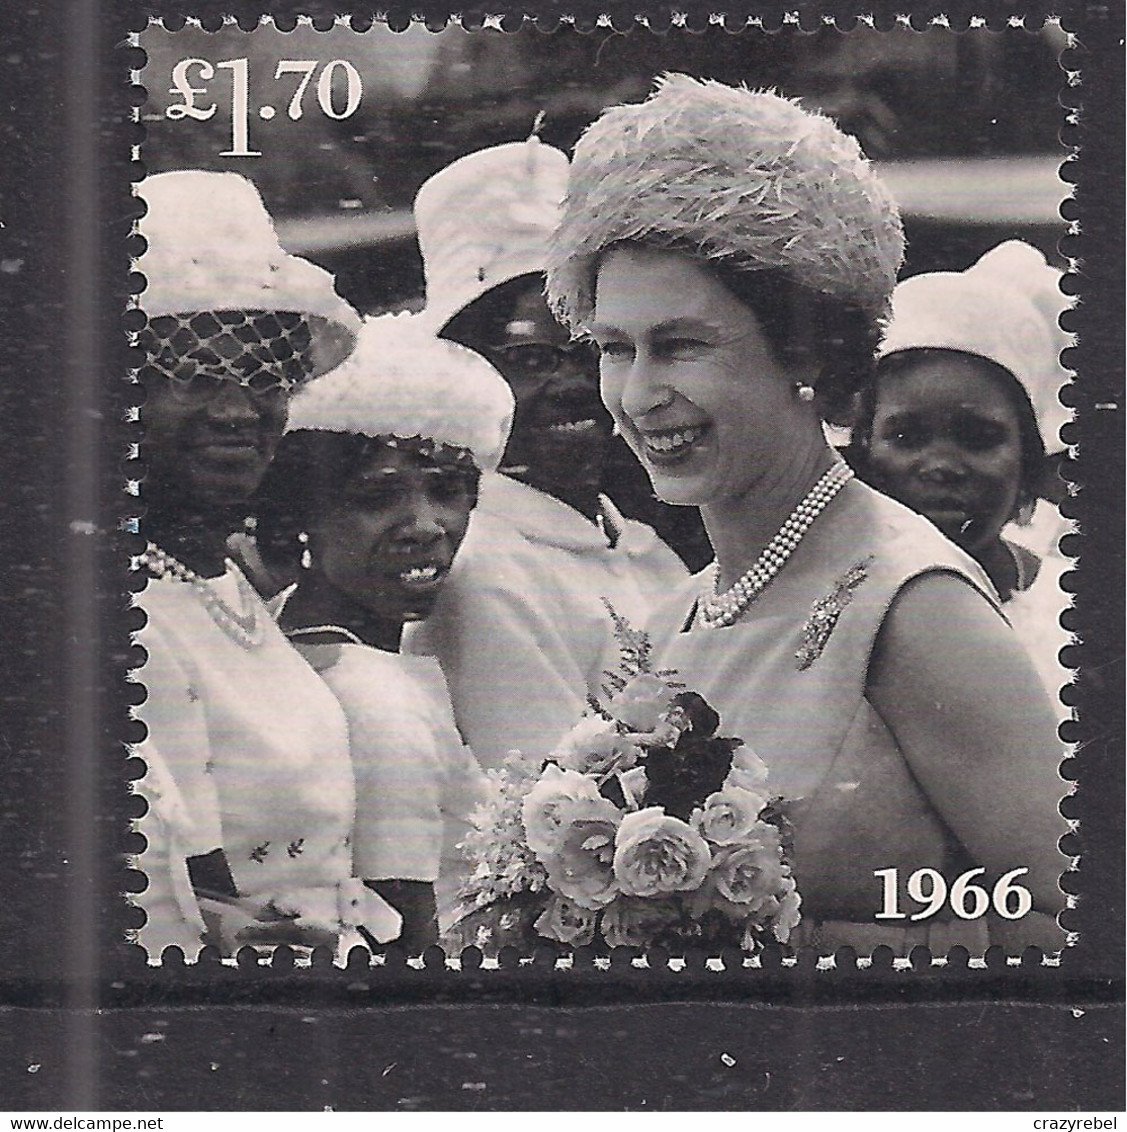 GB 2022 QE2 £1.70 Her Majesty The Queens Platinum Jubilee Umm  SG 4633 ( R1033 ) - Unused Stamps